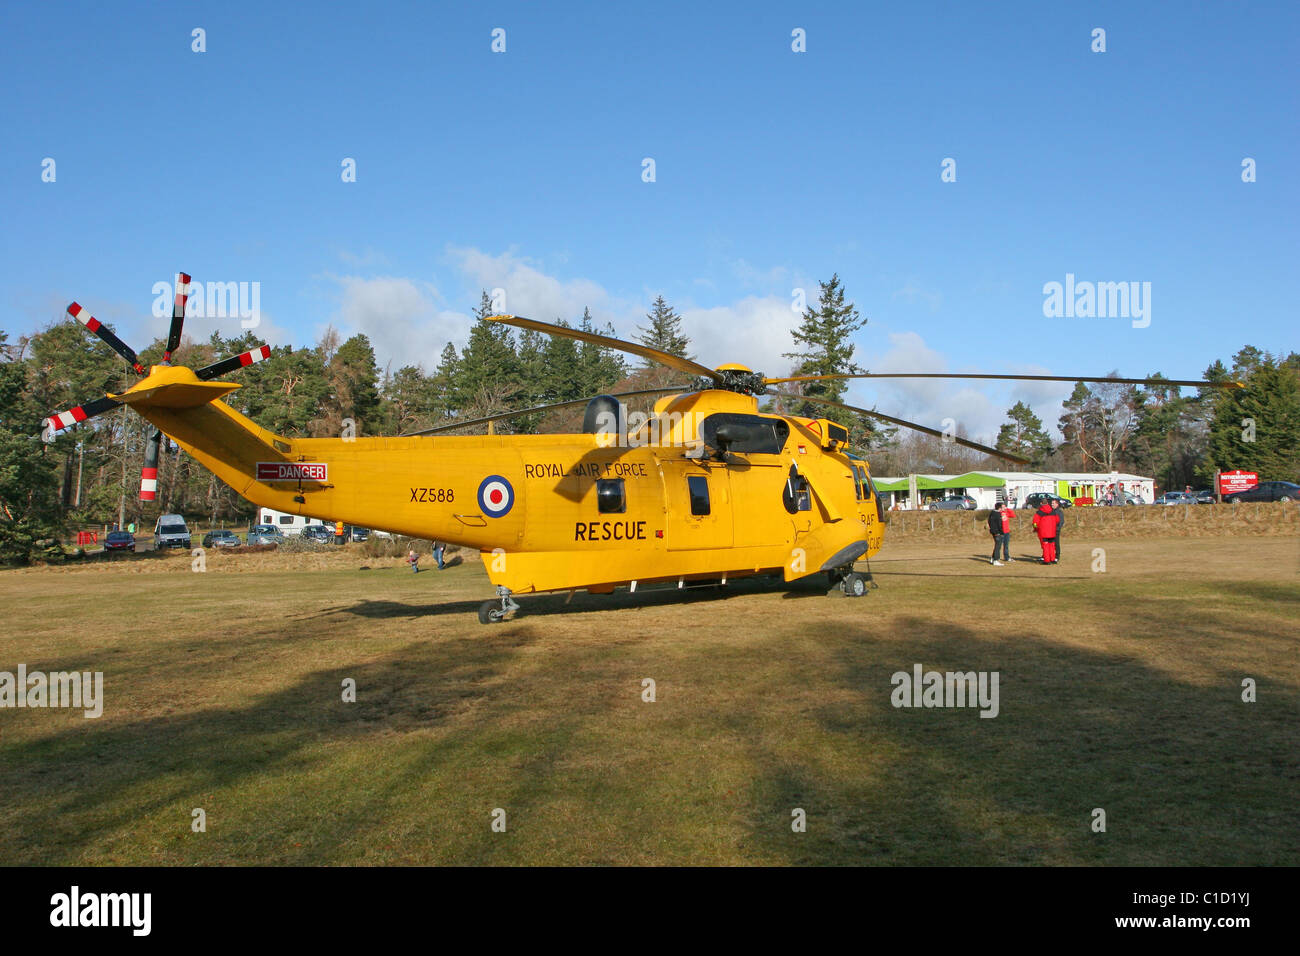 RAF See King Helicopter Stock Photo